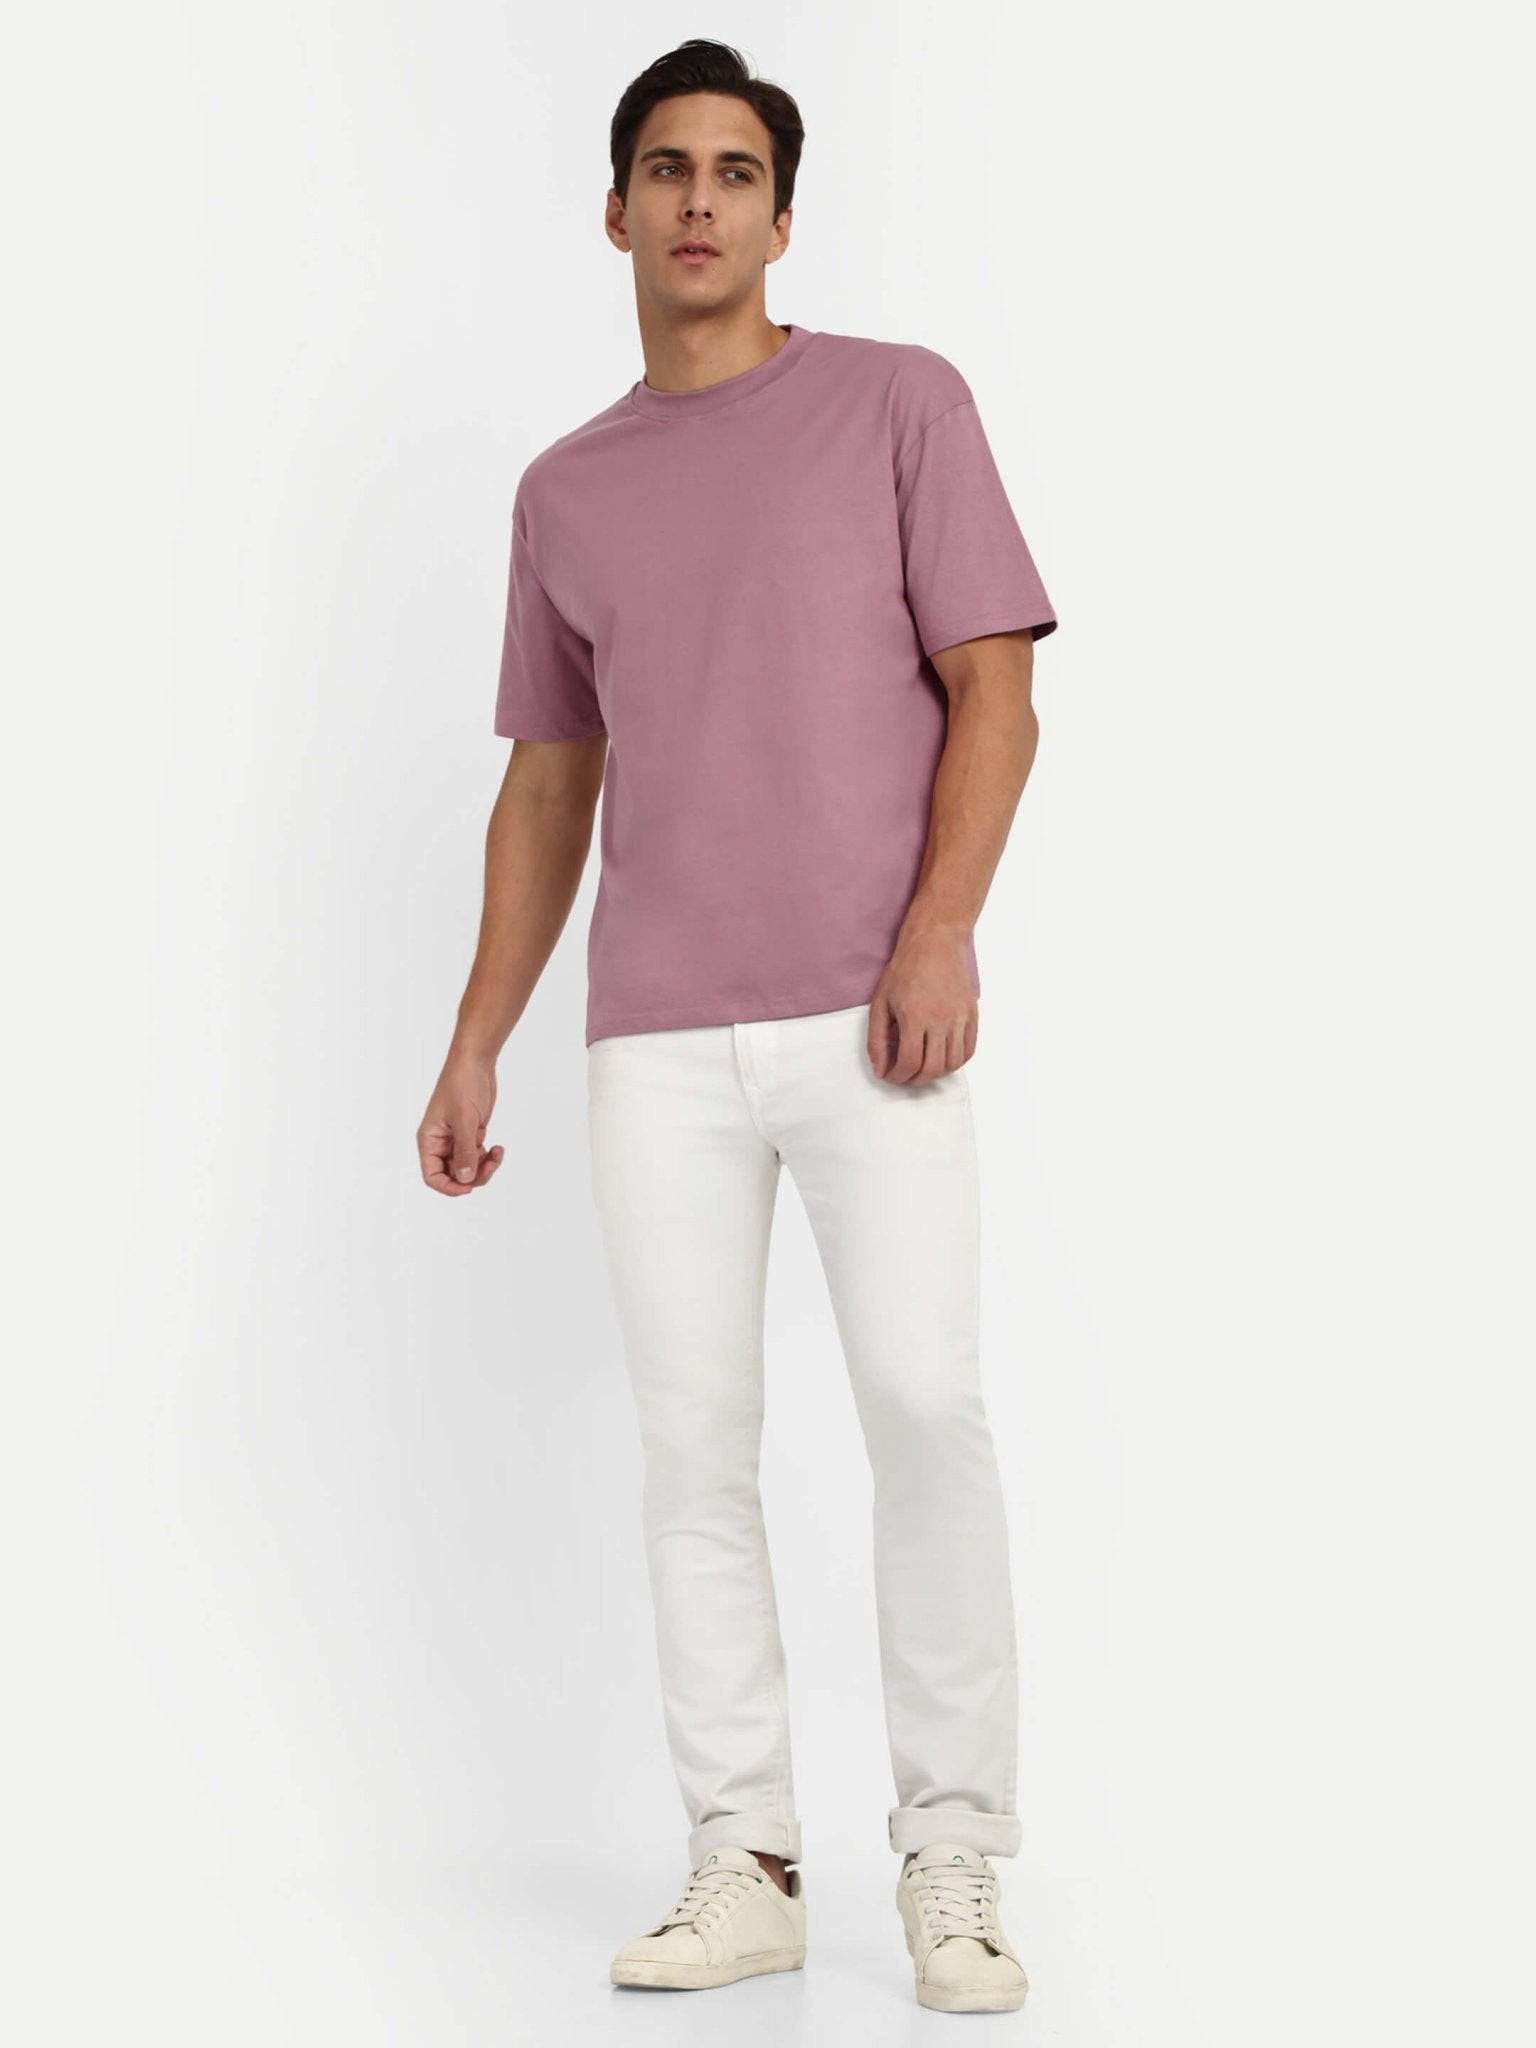 Relaxed Basic T-Shirt - Salmon Pink